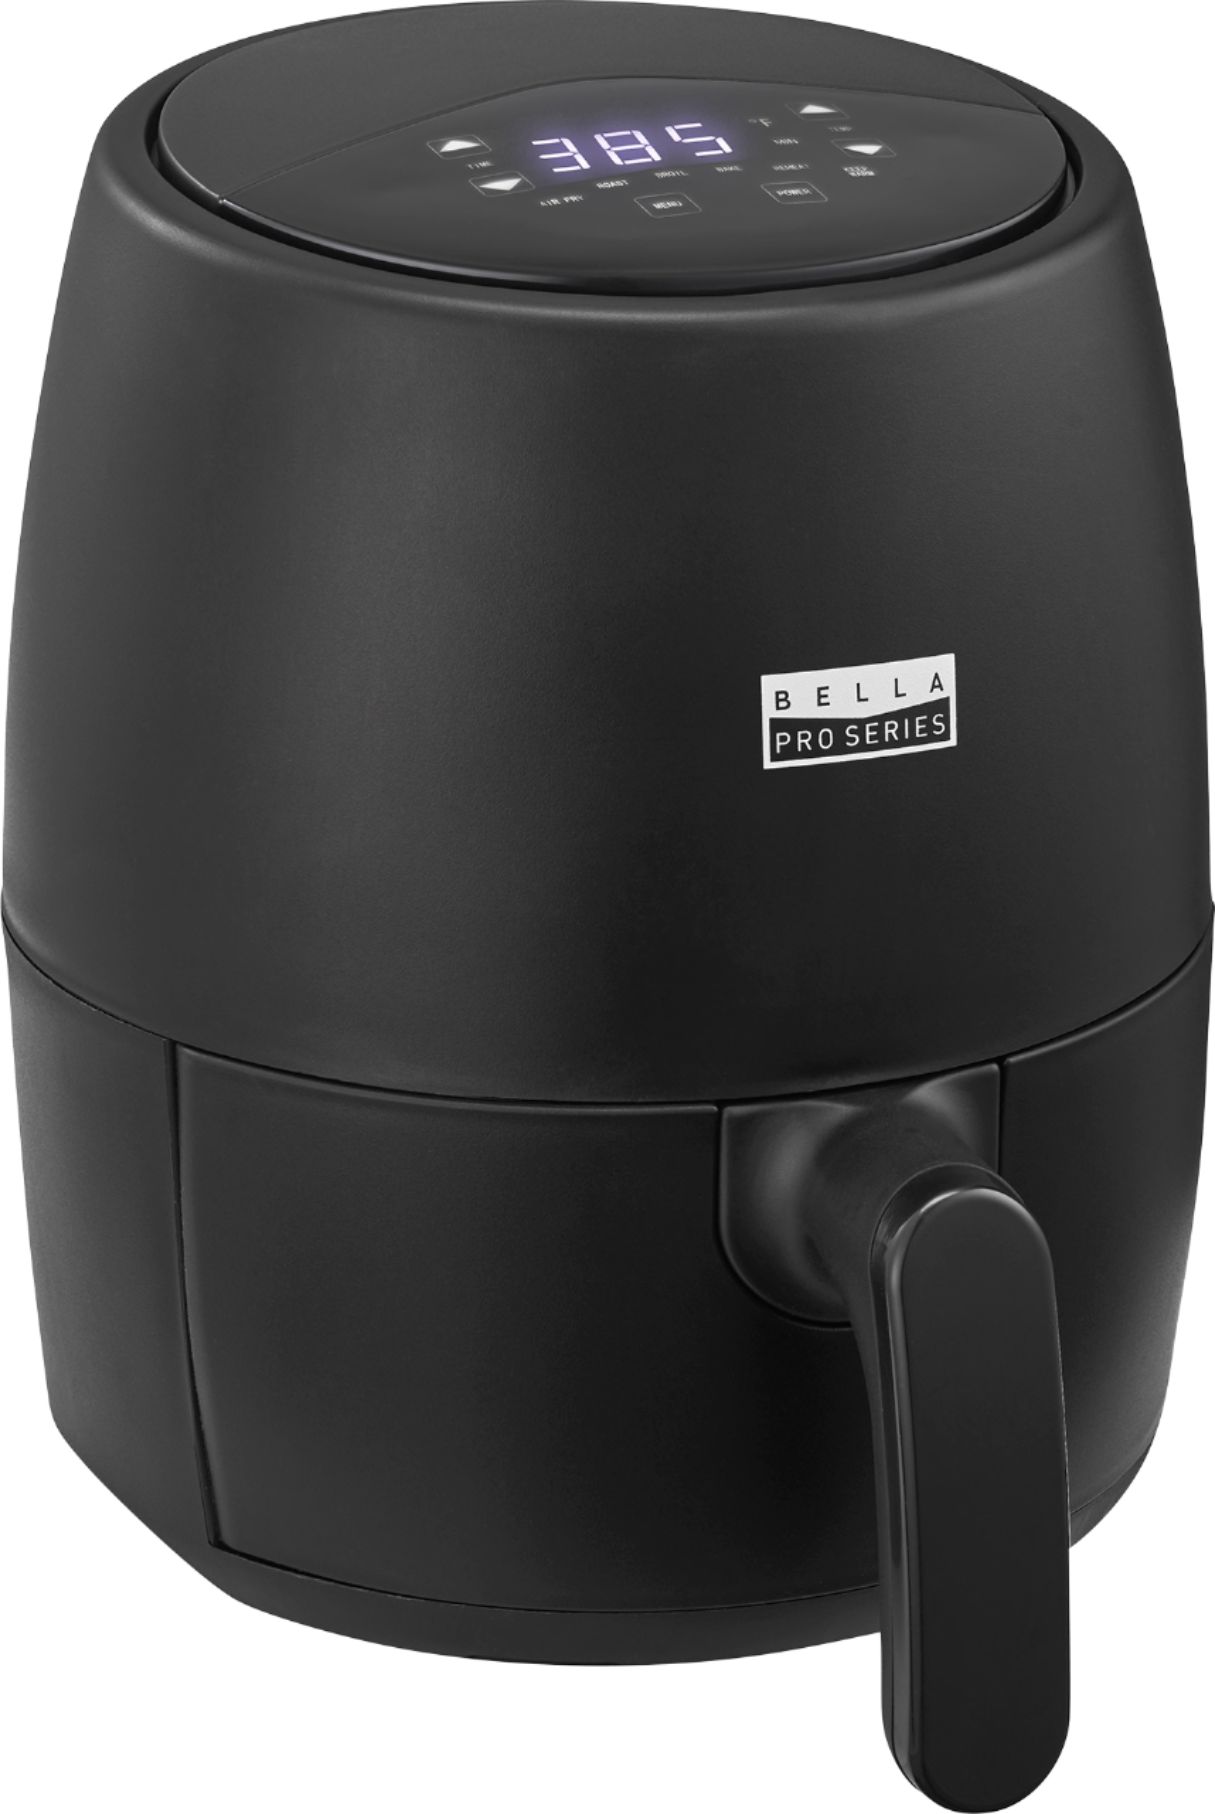 Angle View: Bella Pro Series - 6-qt. Digital Air Fryer with Stainless Finish - Black Stainless Steel